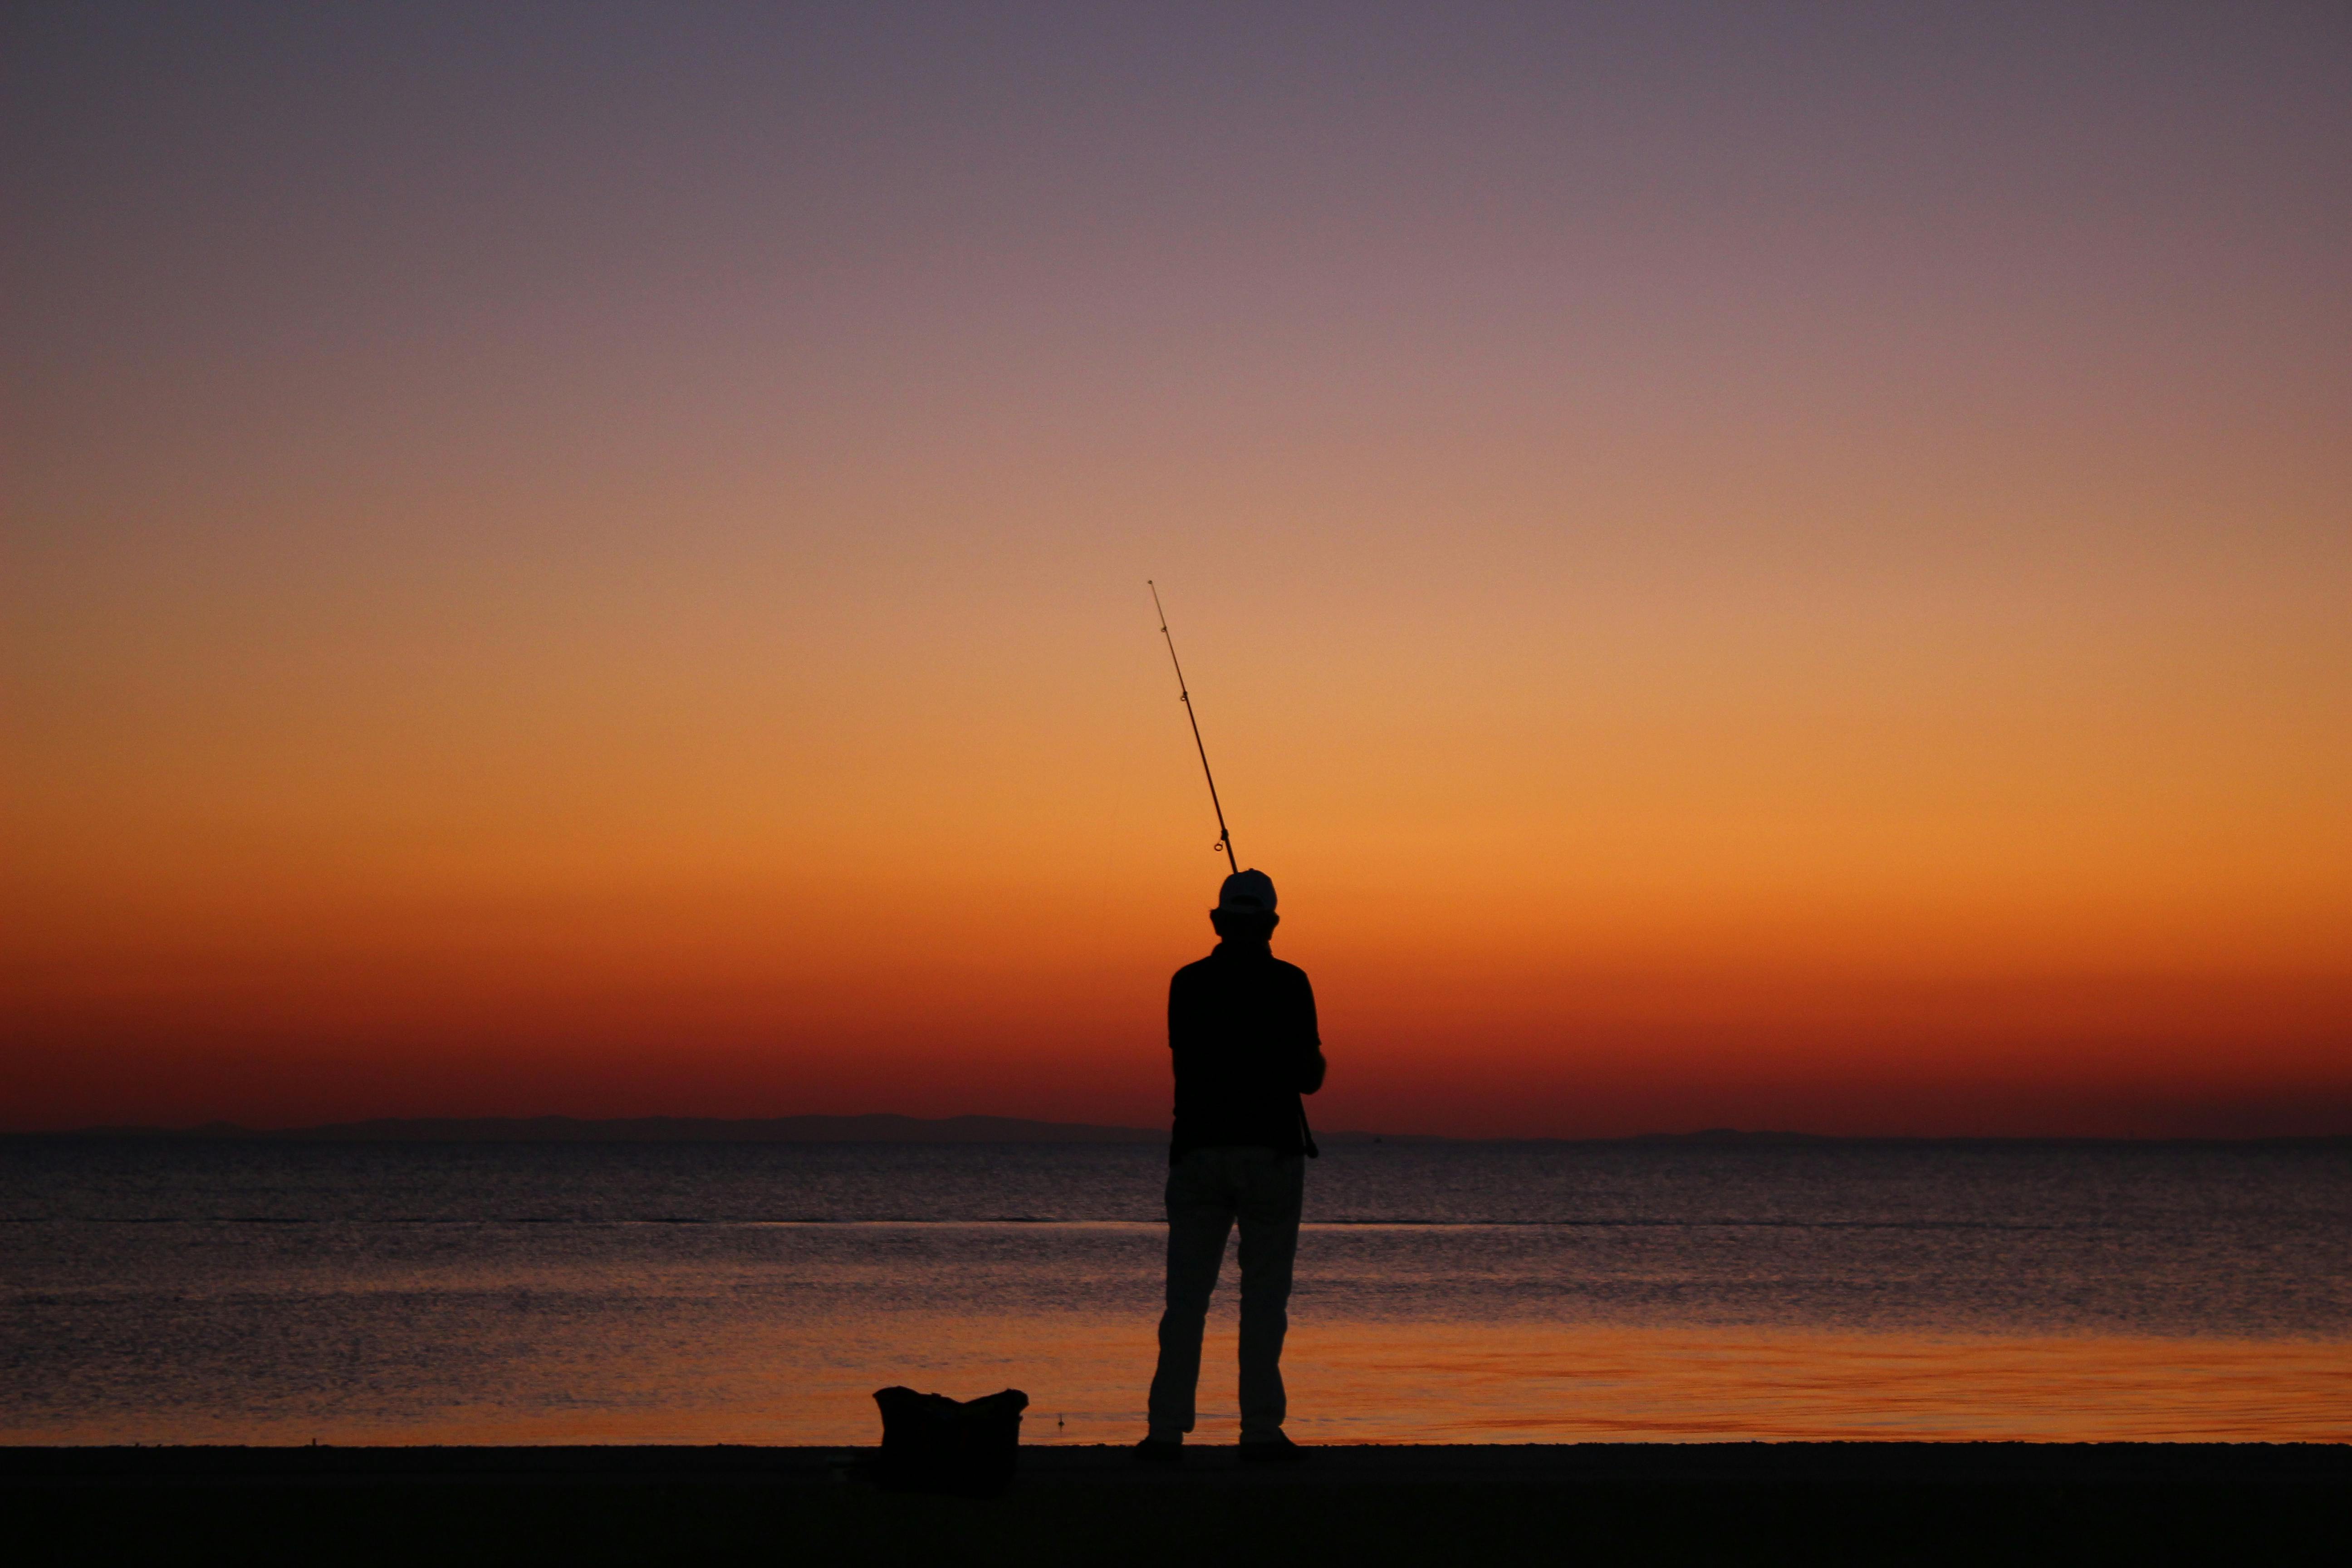 Back View of a Man Fishing in the Sea at Sunset · Free Stock Photo